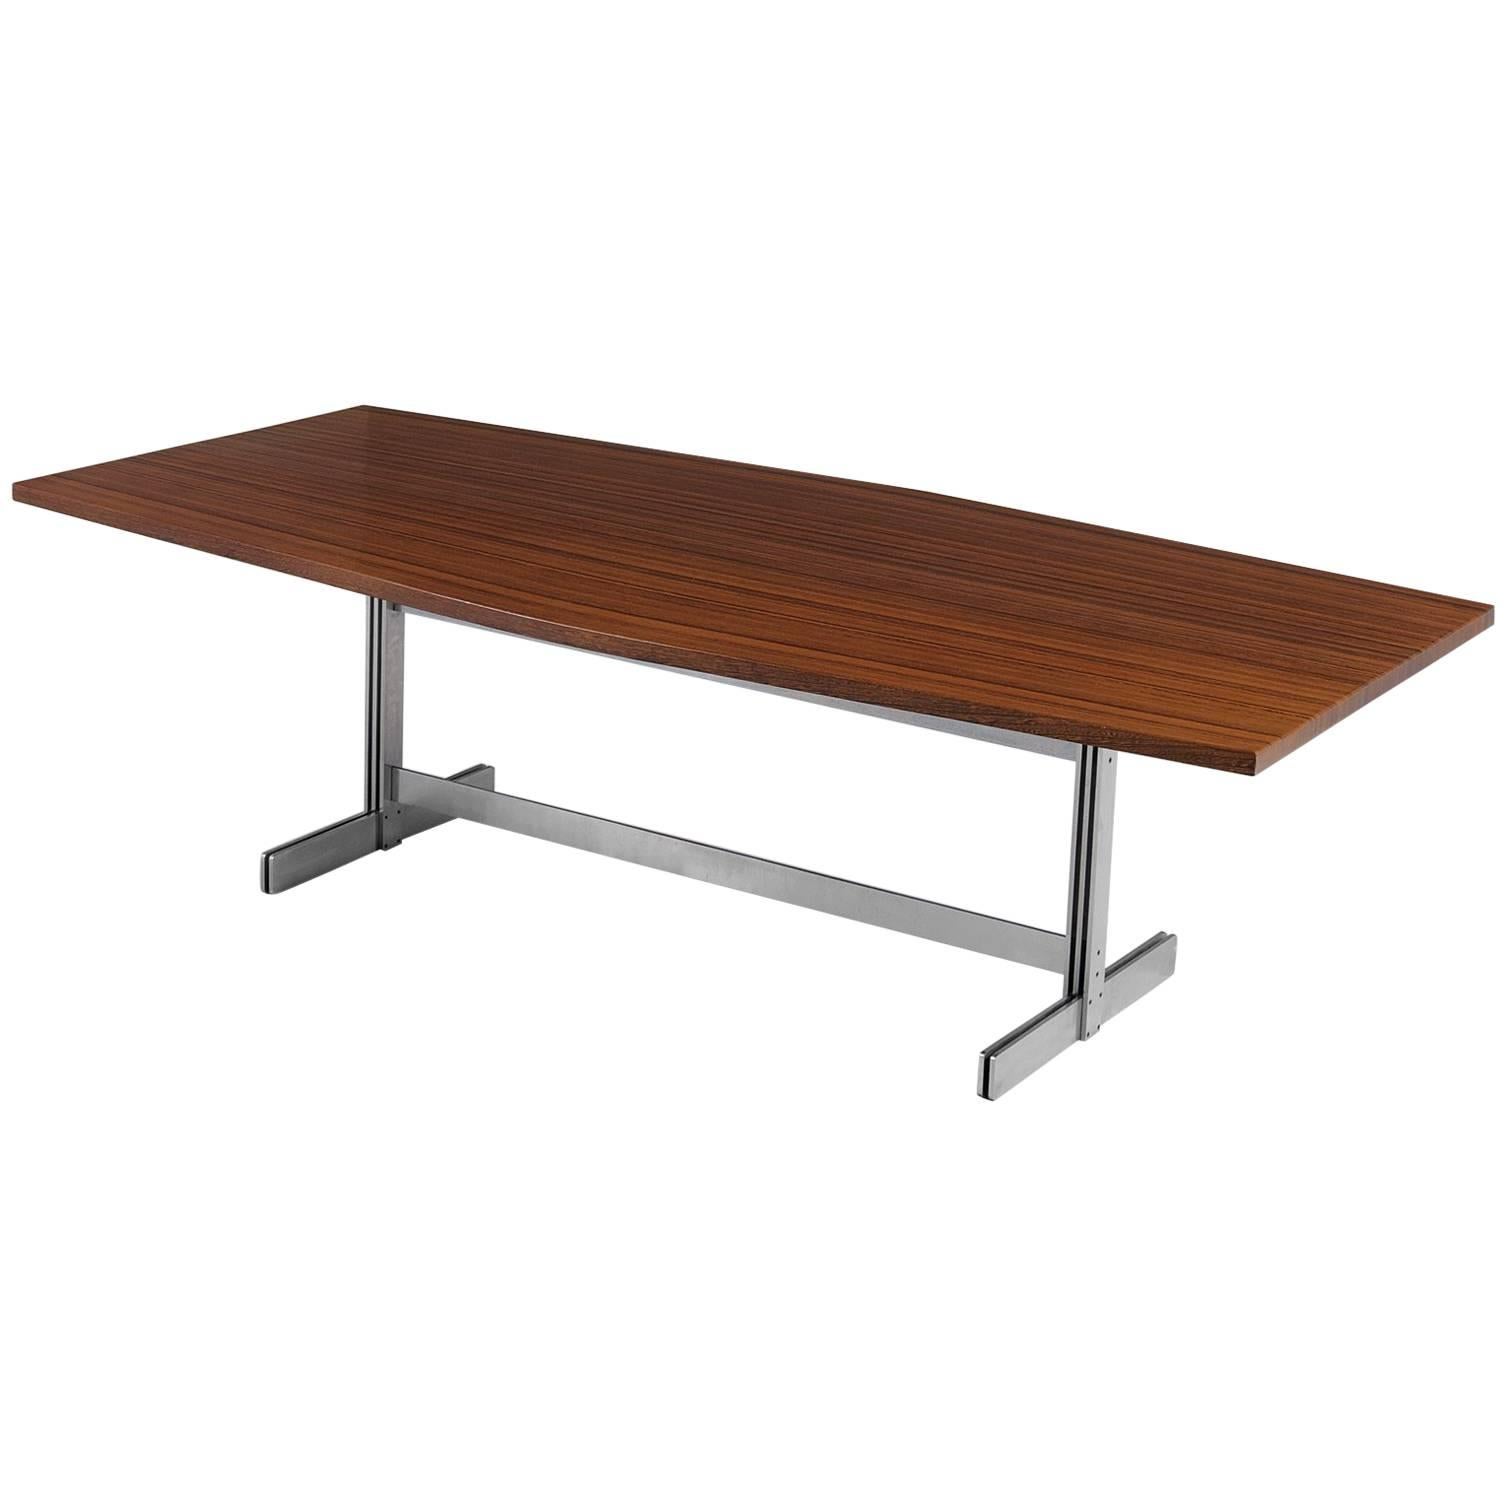 Jules Wabbes 'Tonneau' Table in Solid Wenge